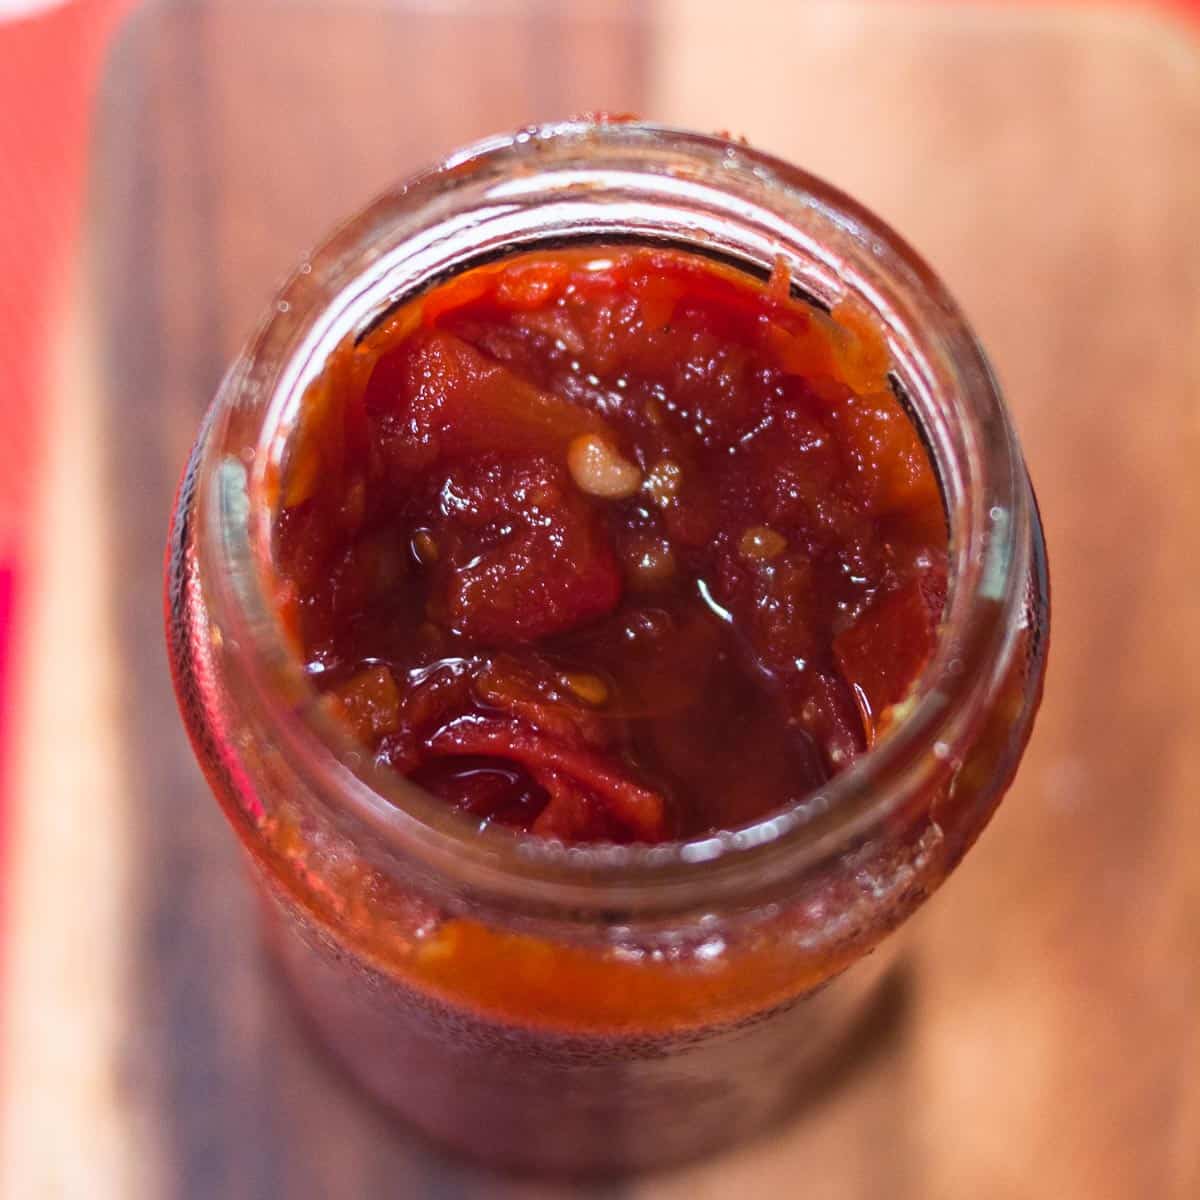 A close up shot of the tomato jam in an opened jar.